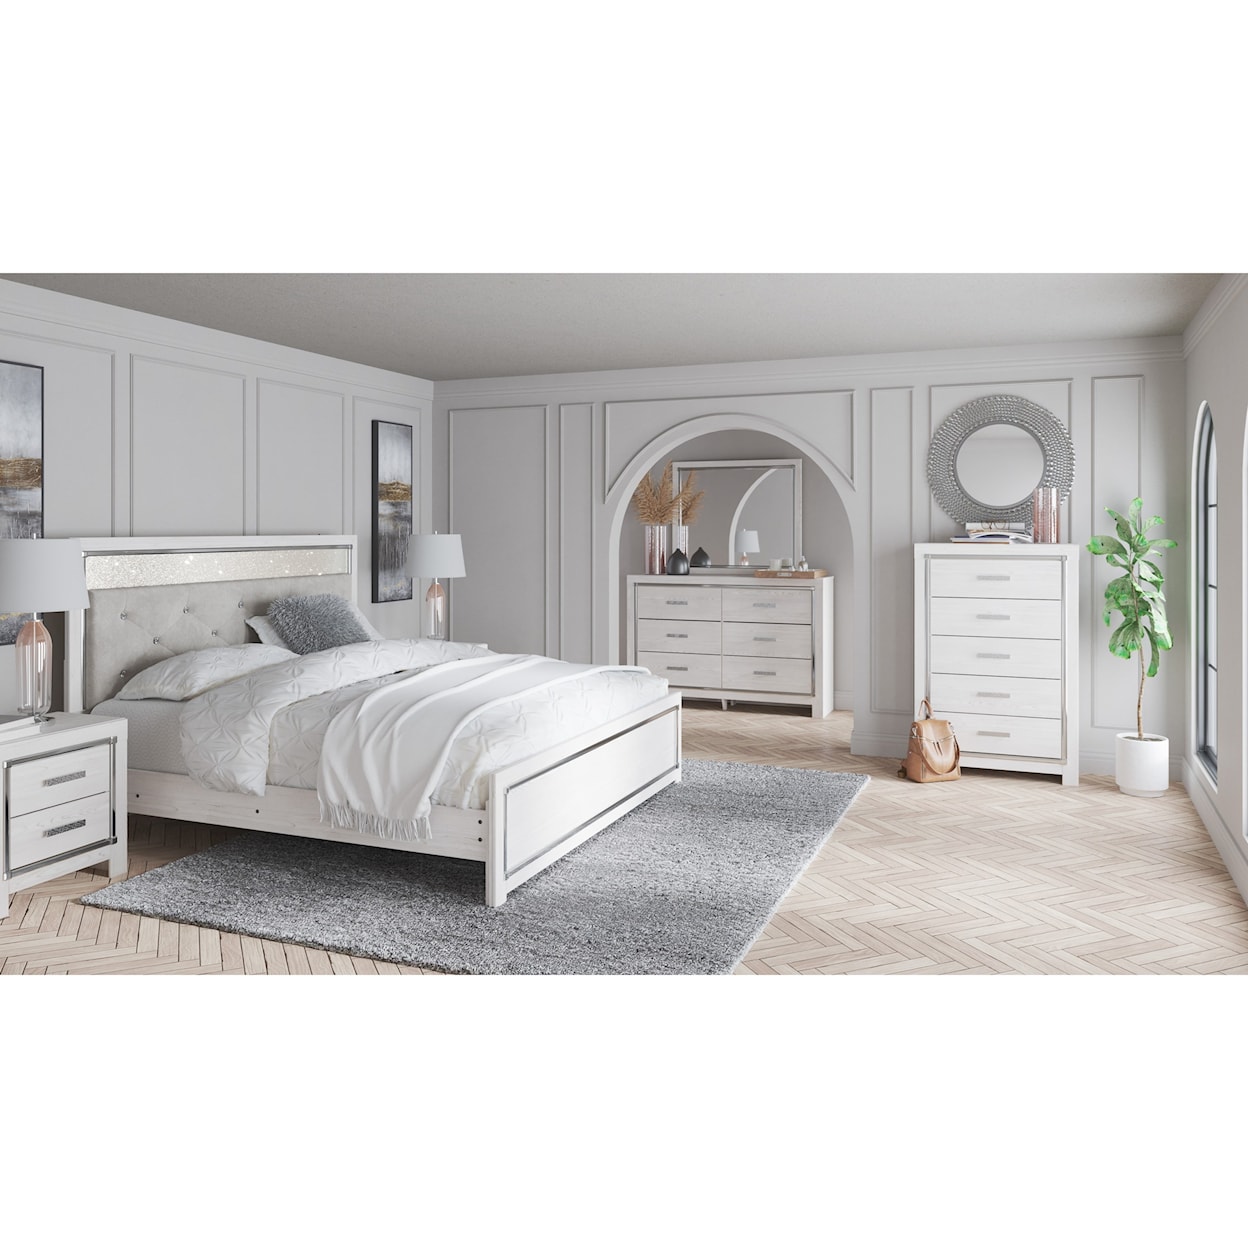 Signature Altyra King Bedroom Group